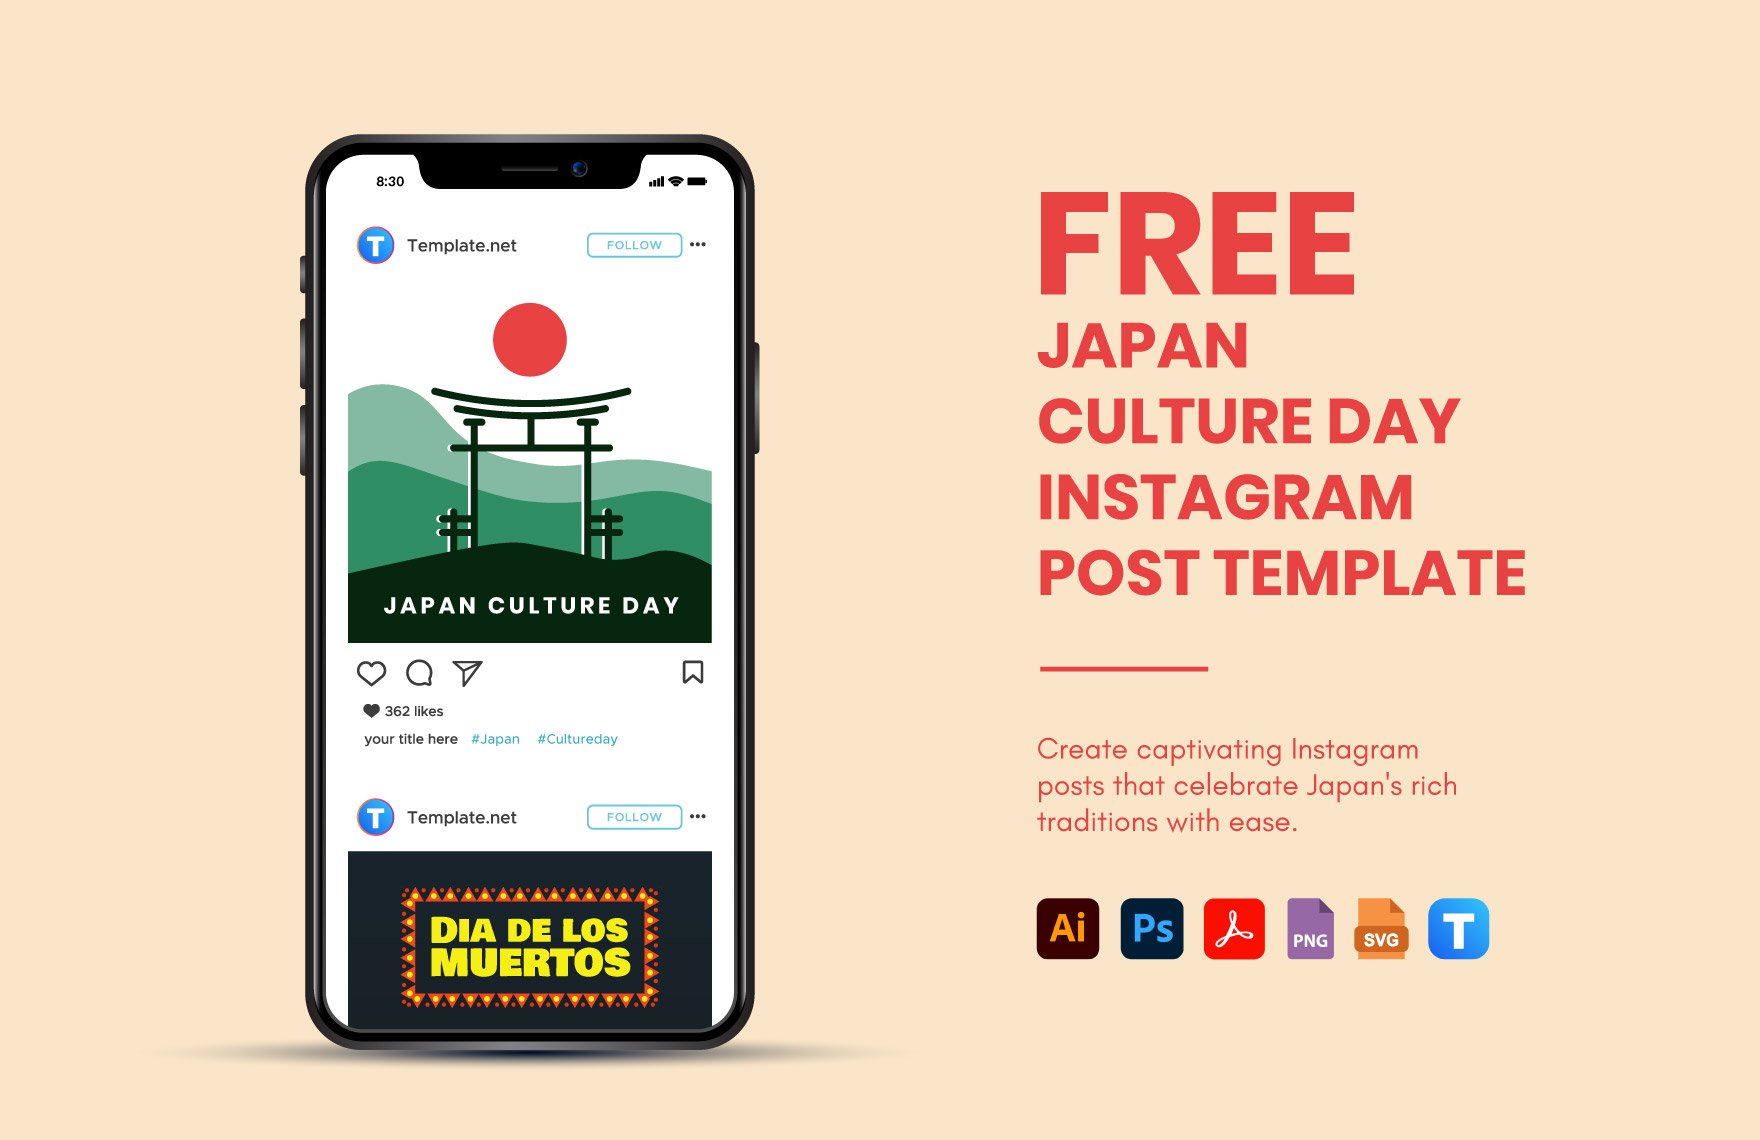 Japan Culture Day Instagram Post Template